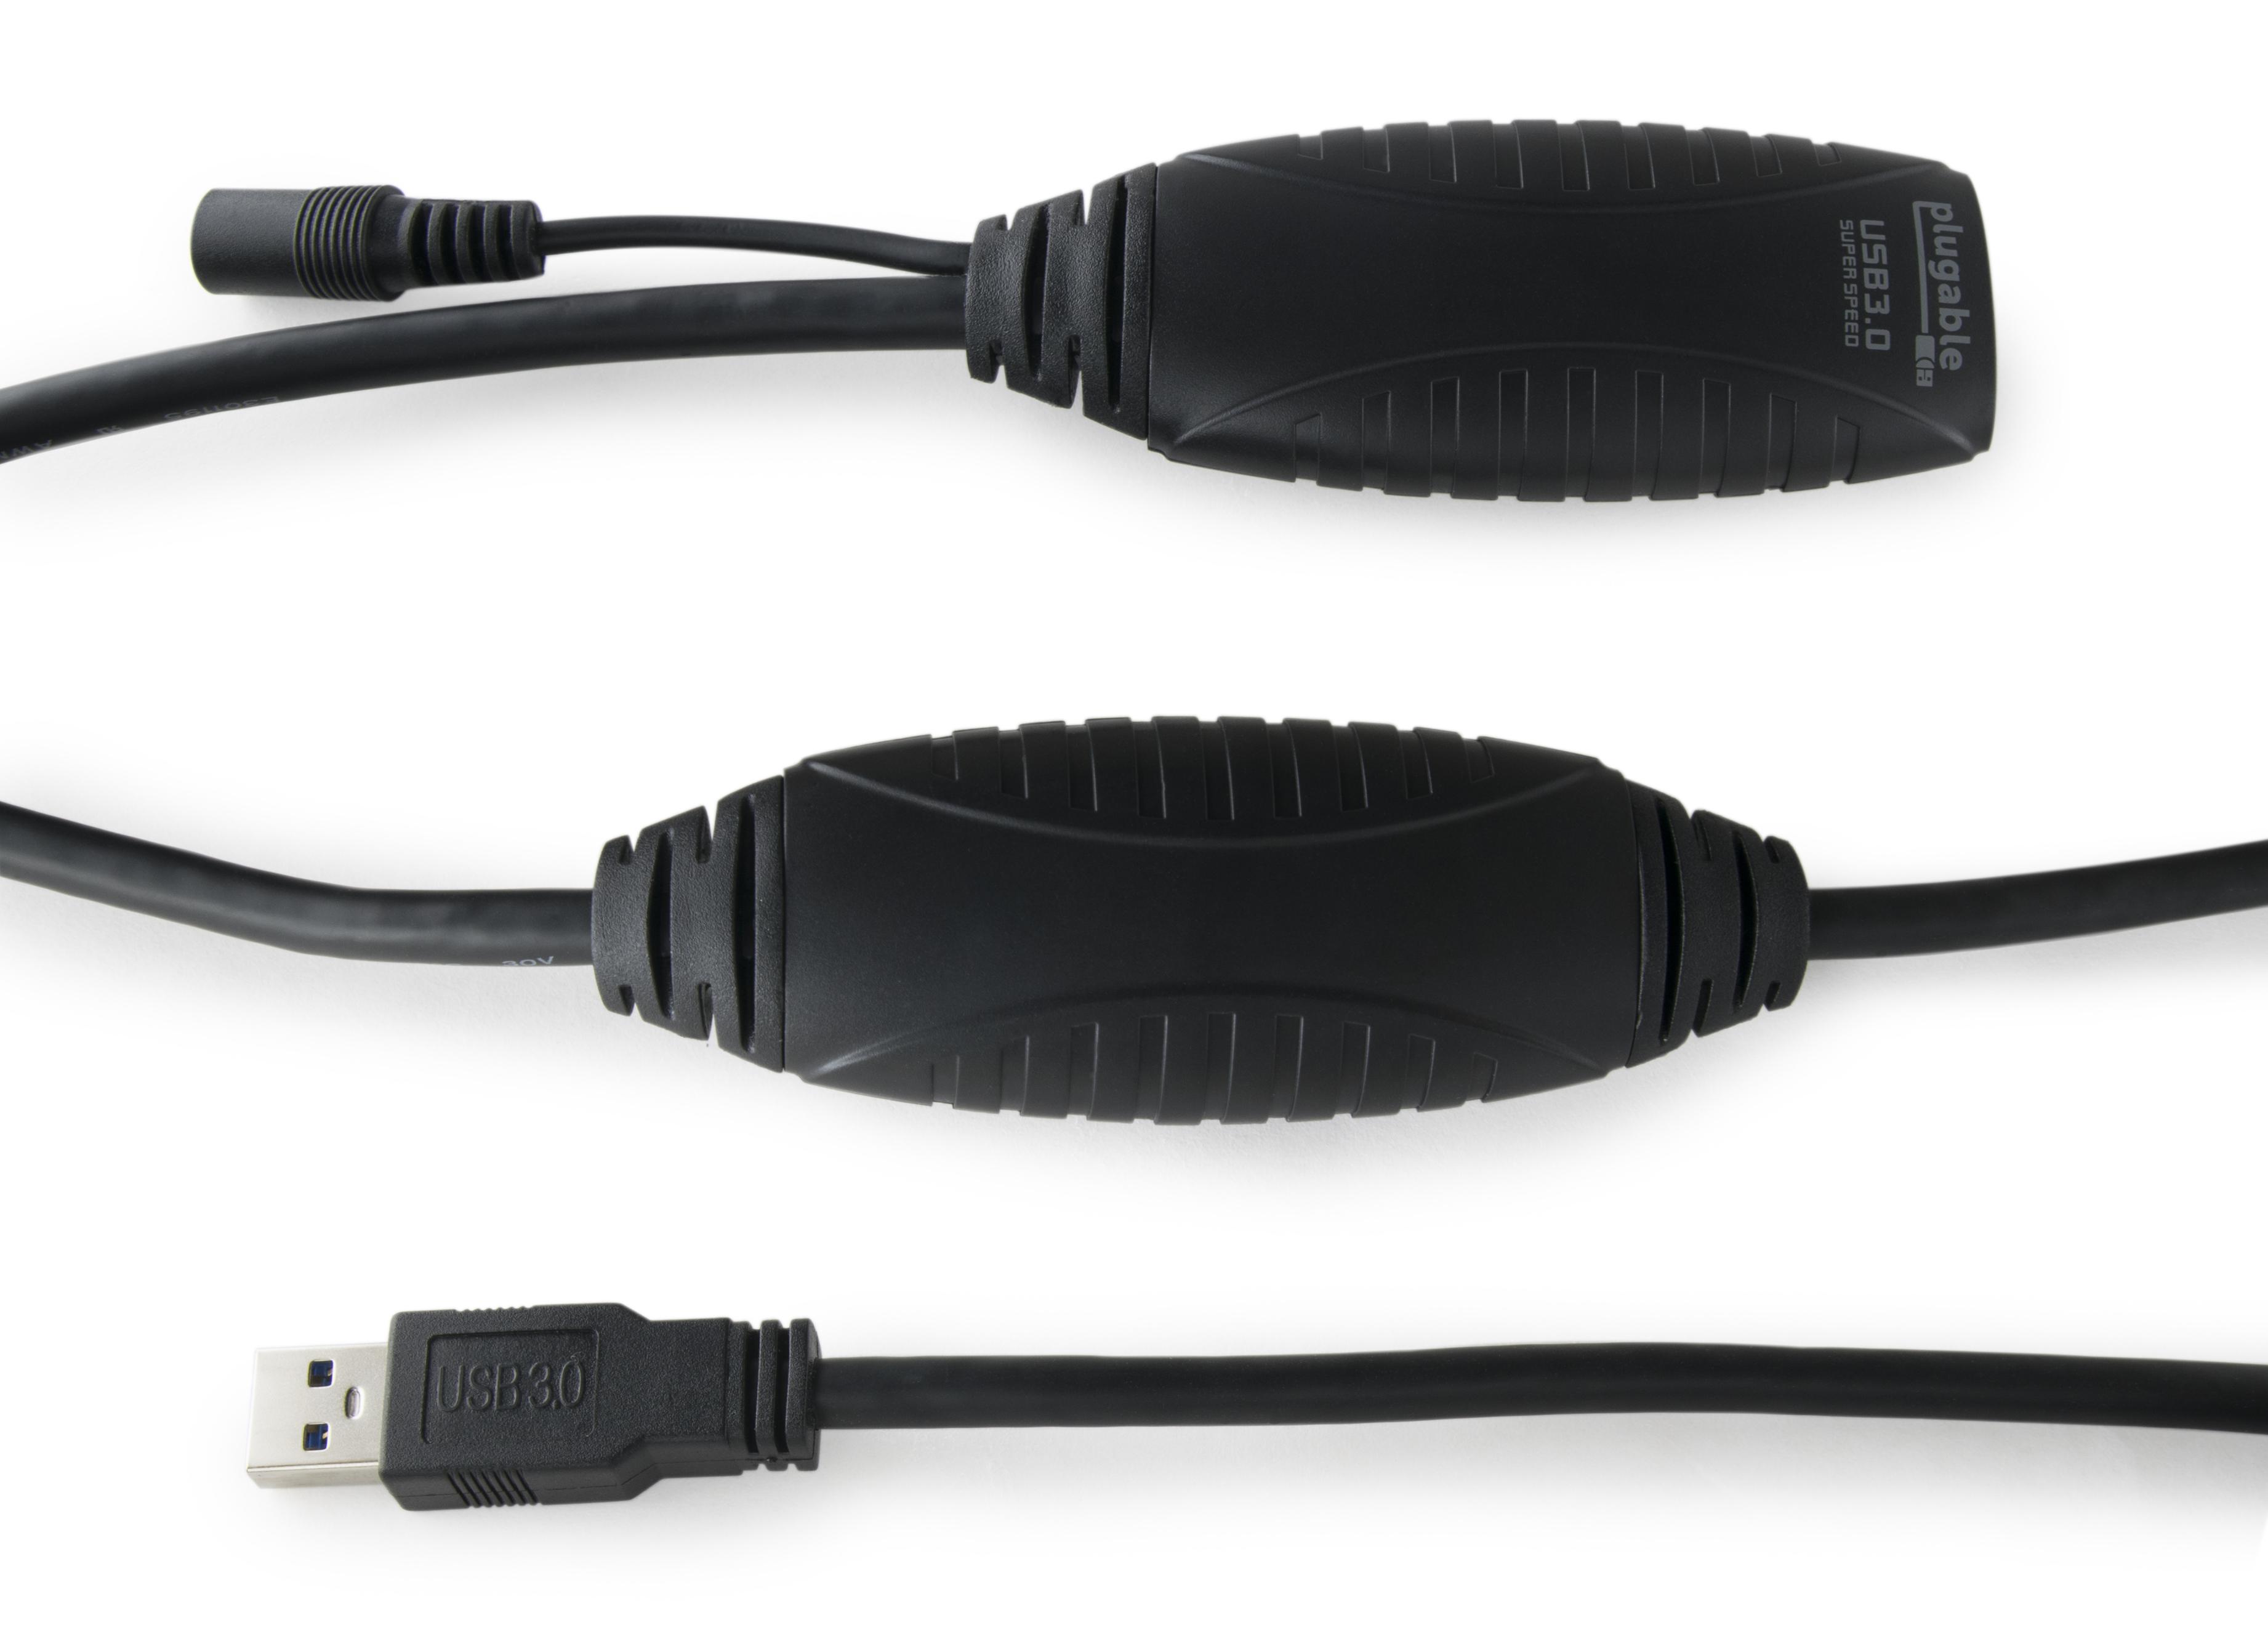 Plugable 10 Meter (32 Foot) USB 3.0 Active Extension Cable with AC Power Adapter and Back-Voltage Protection - image 2 of 5